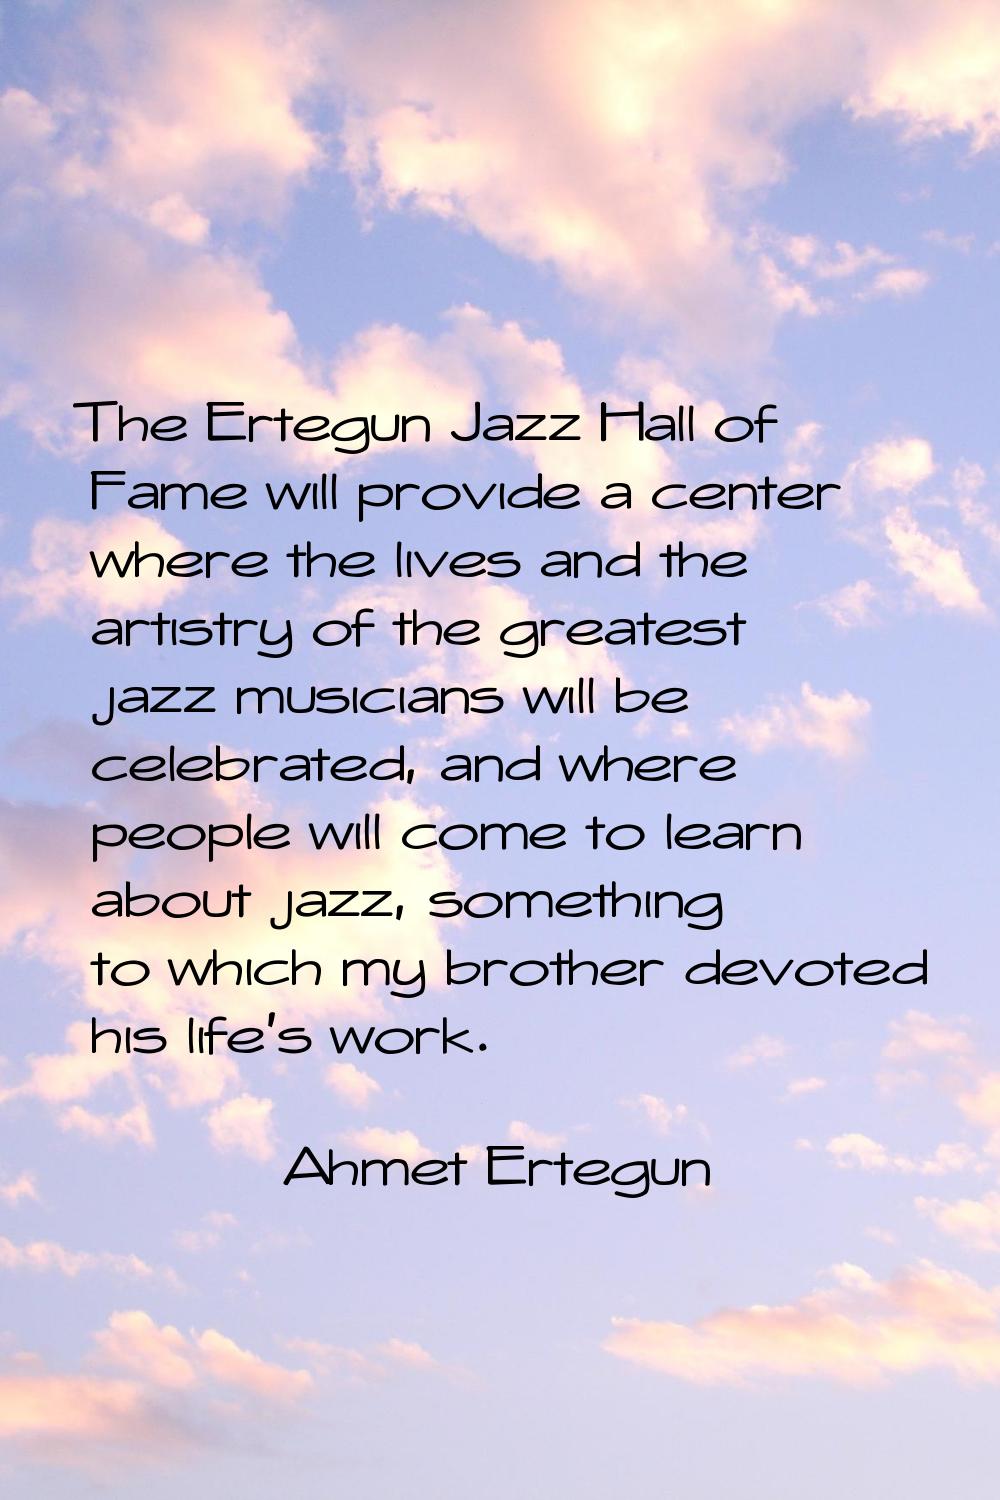 The Ertegun Jazz Hall of Fame will provide a center where the lives and the artistry of the greates